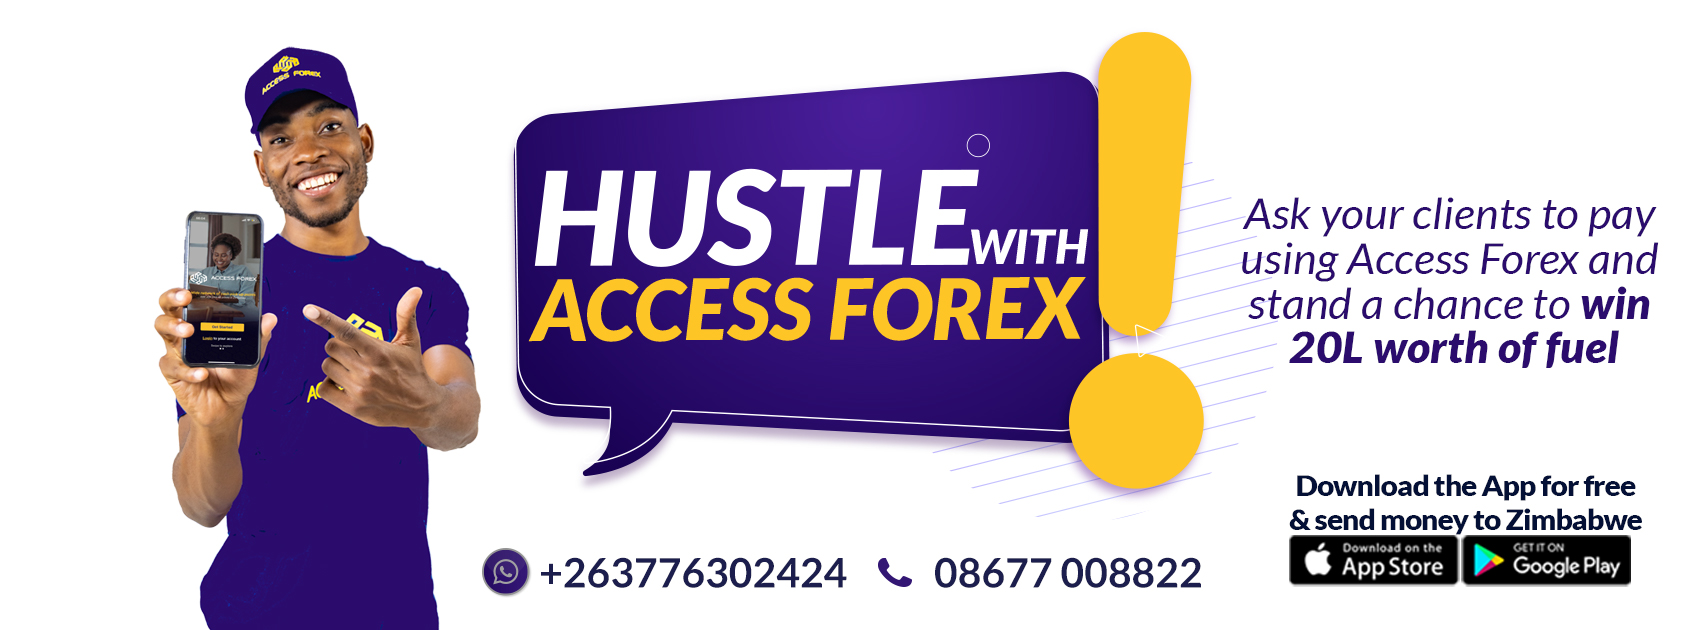 HUSTLE WITH ACCESS FOREX